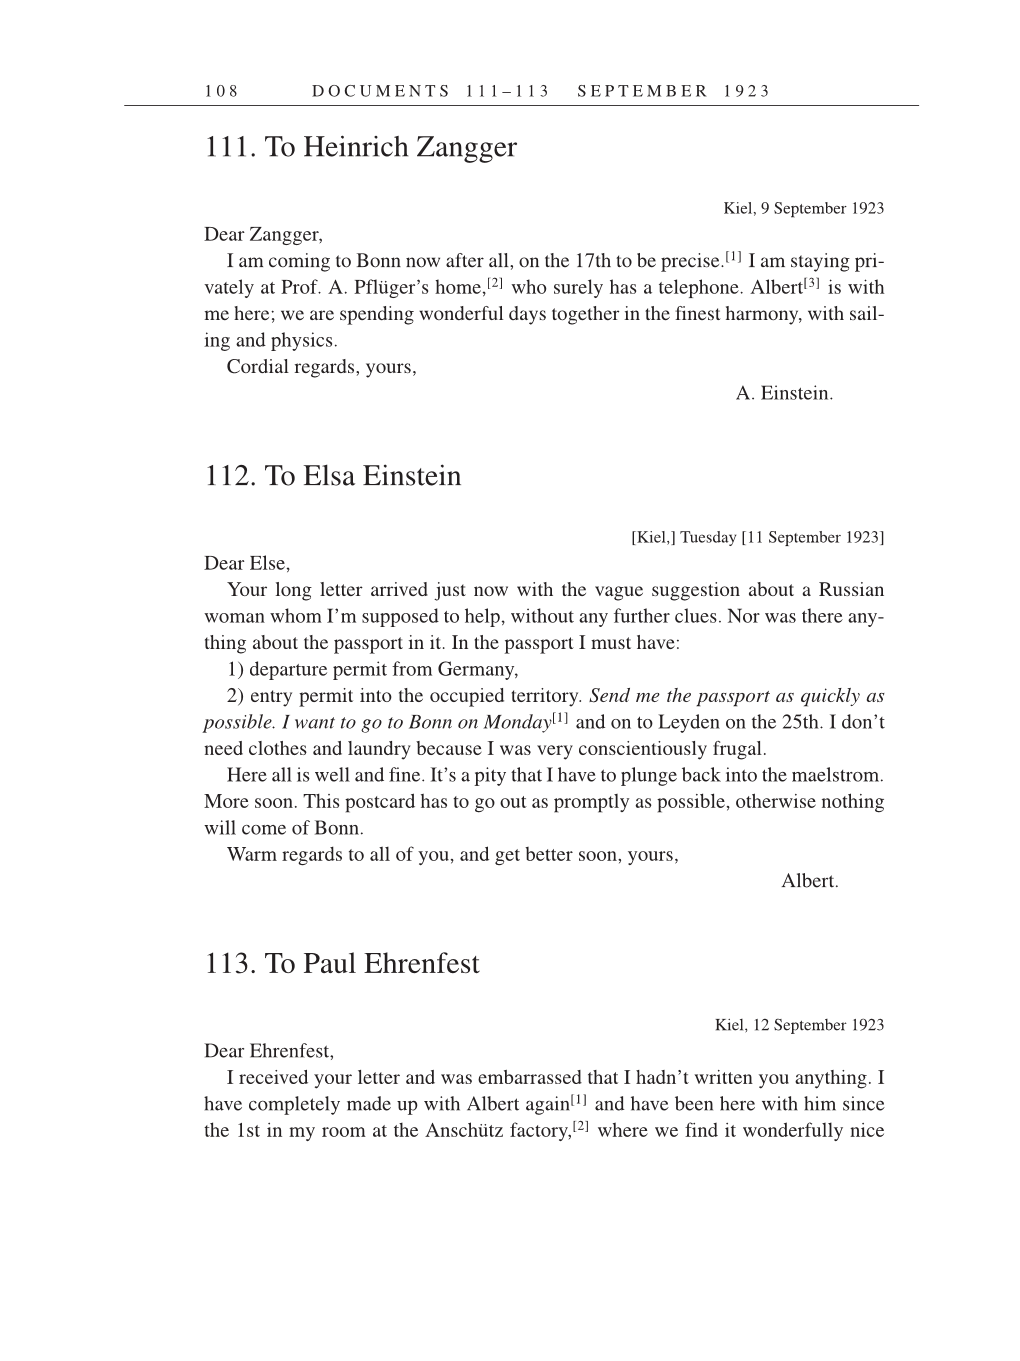 Volume 14: The Berlin Years: Writings & Correspondence, April 1923-May 1925 (English Translation Supplement) page 108